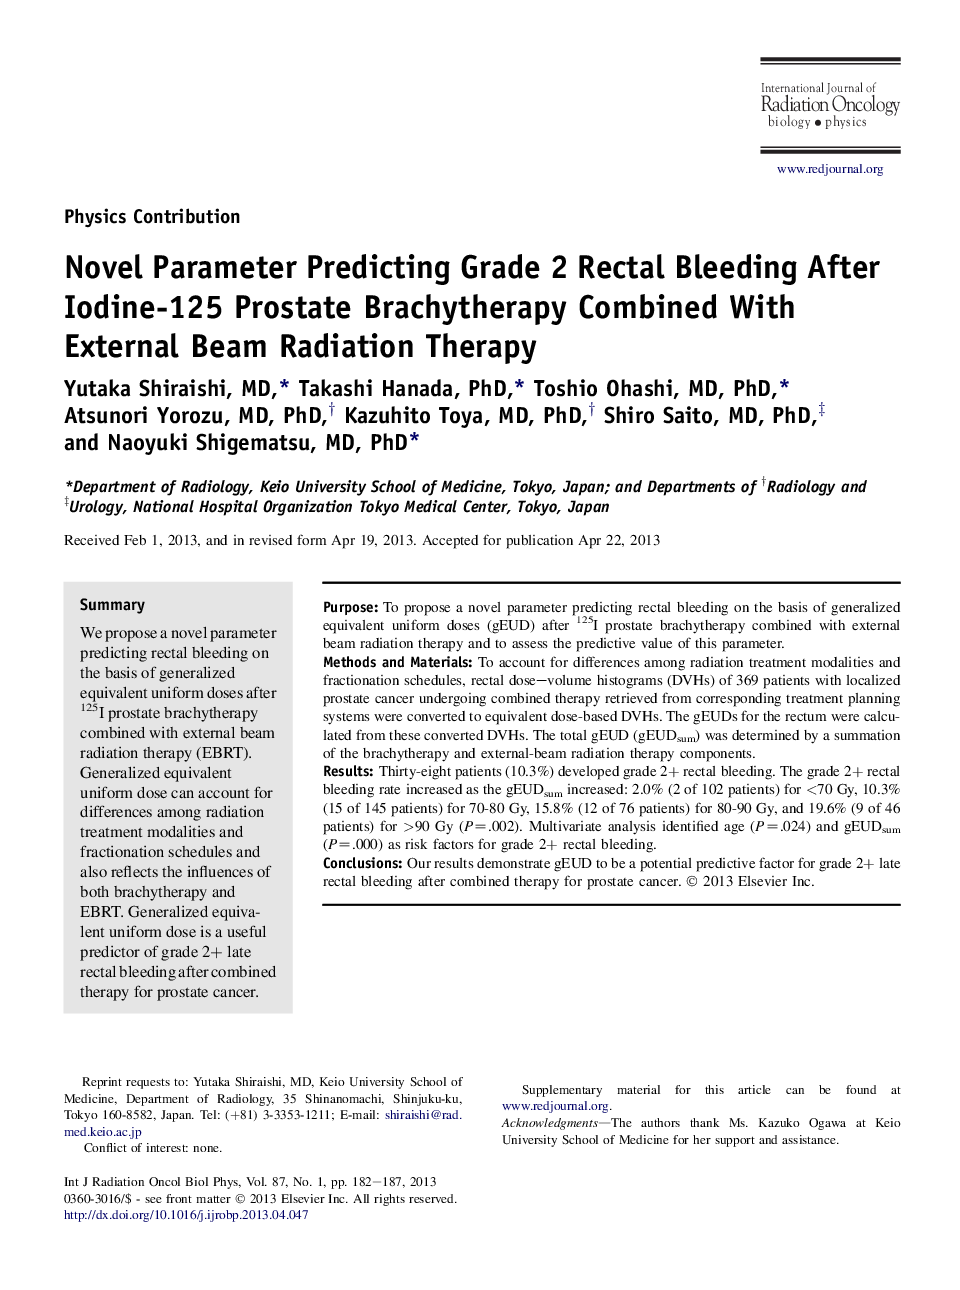 Novel Parameter Predicting Grade 2 Rectal Bleeding After Iodine-125 Prostate Brachytherapy Combined With External Beam Radiation Therapy